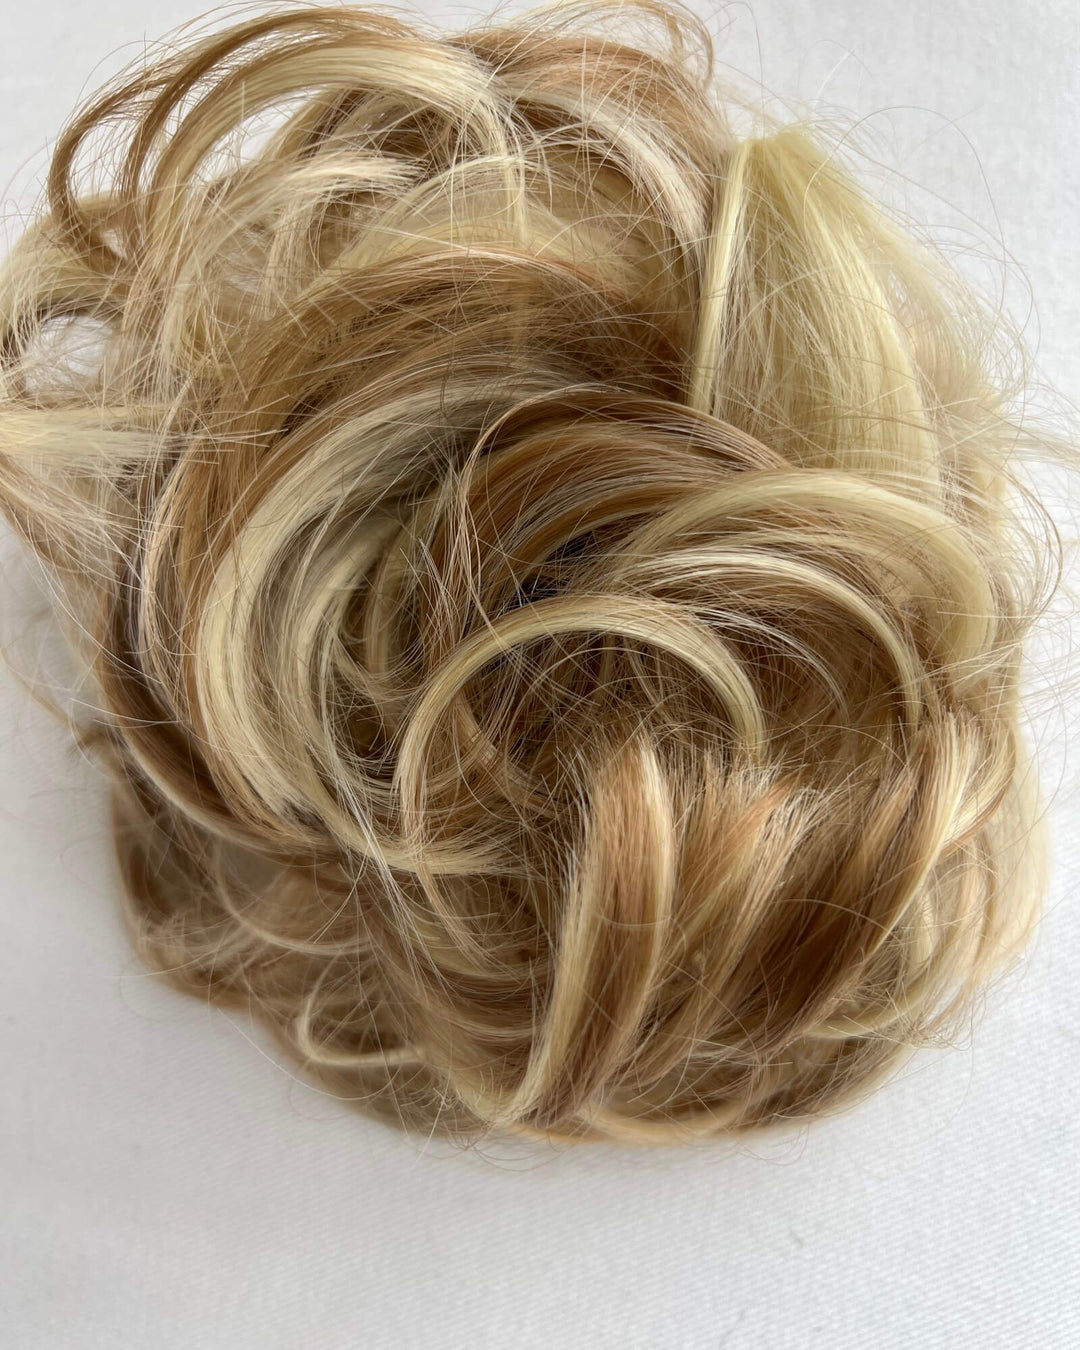 Apexhairs Curly Elastic Bun Hair Extension Hairpiece